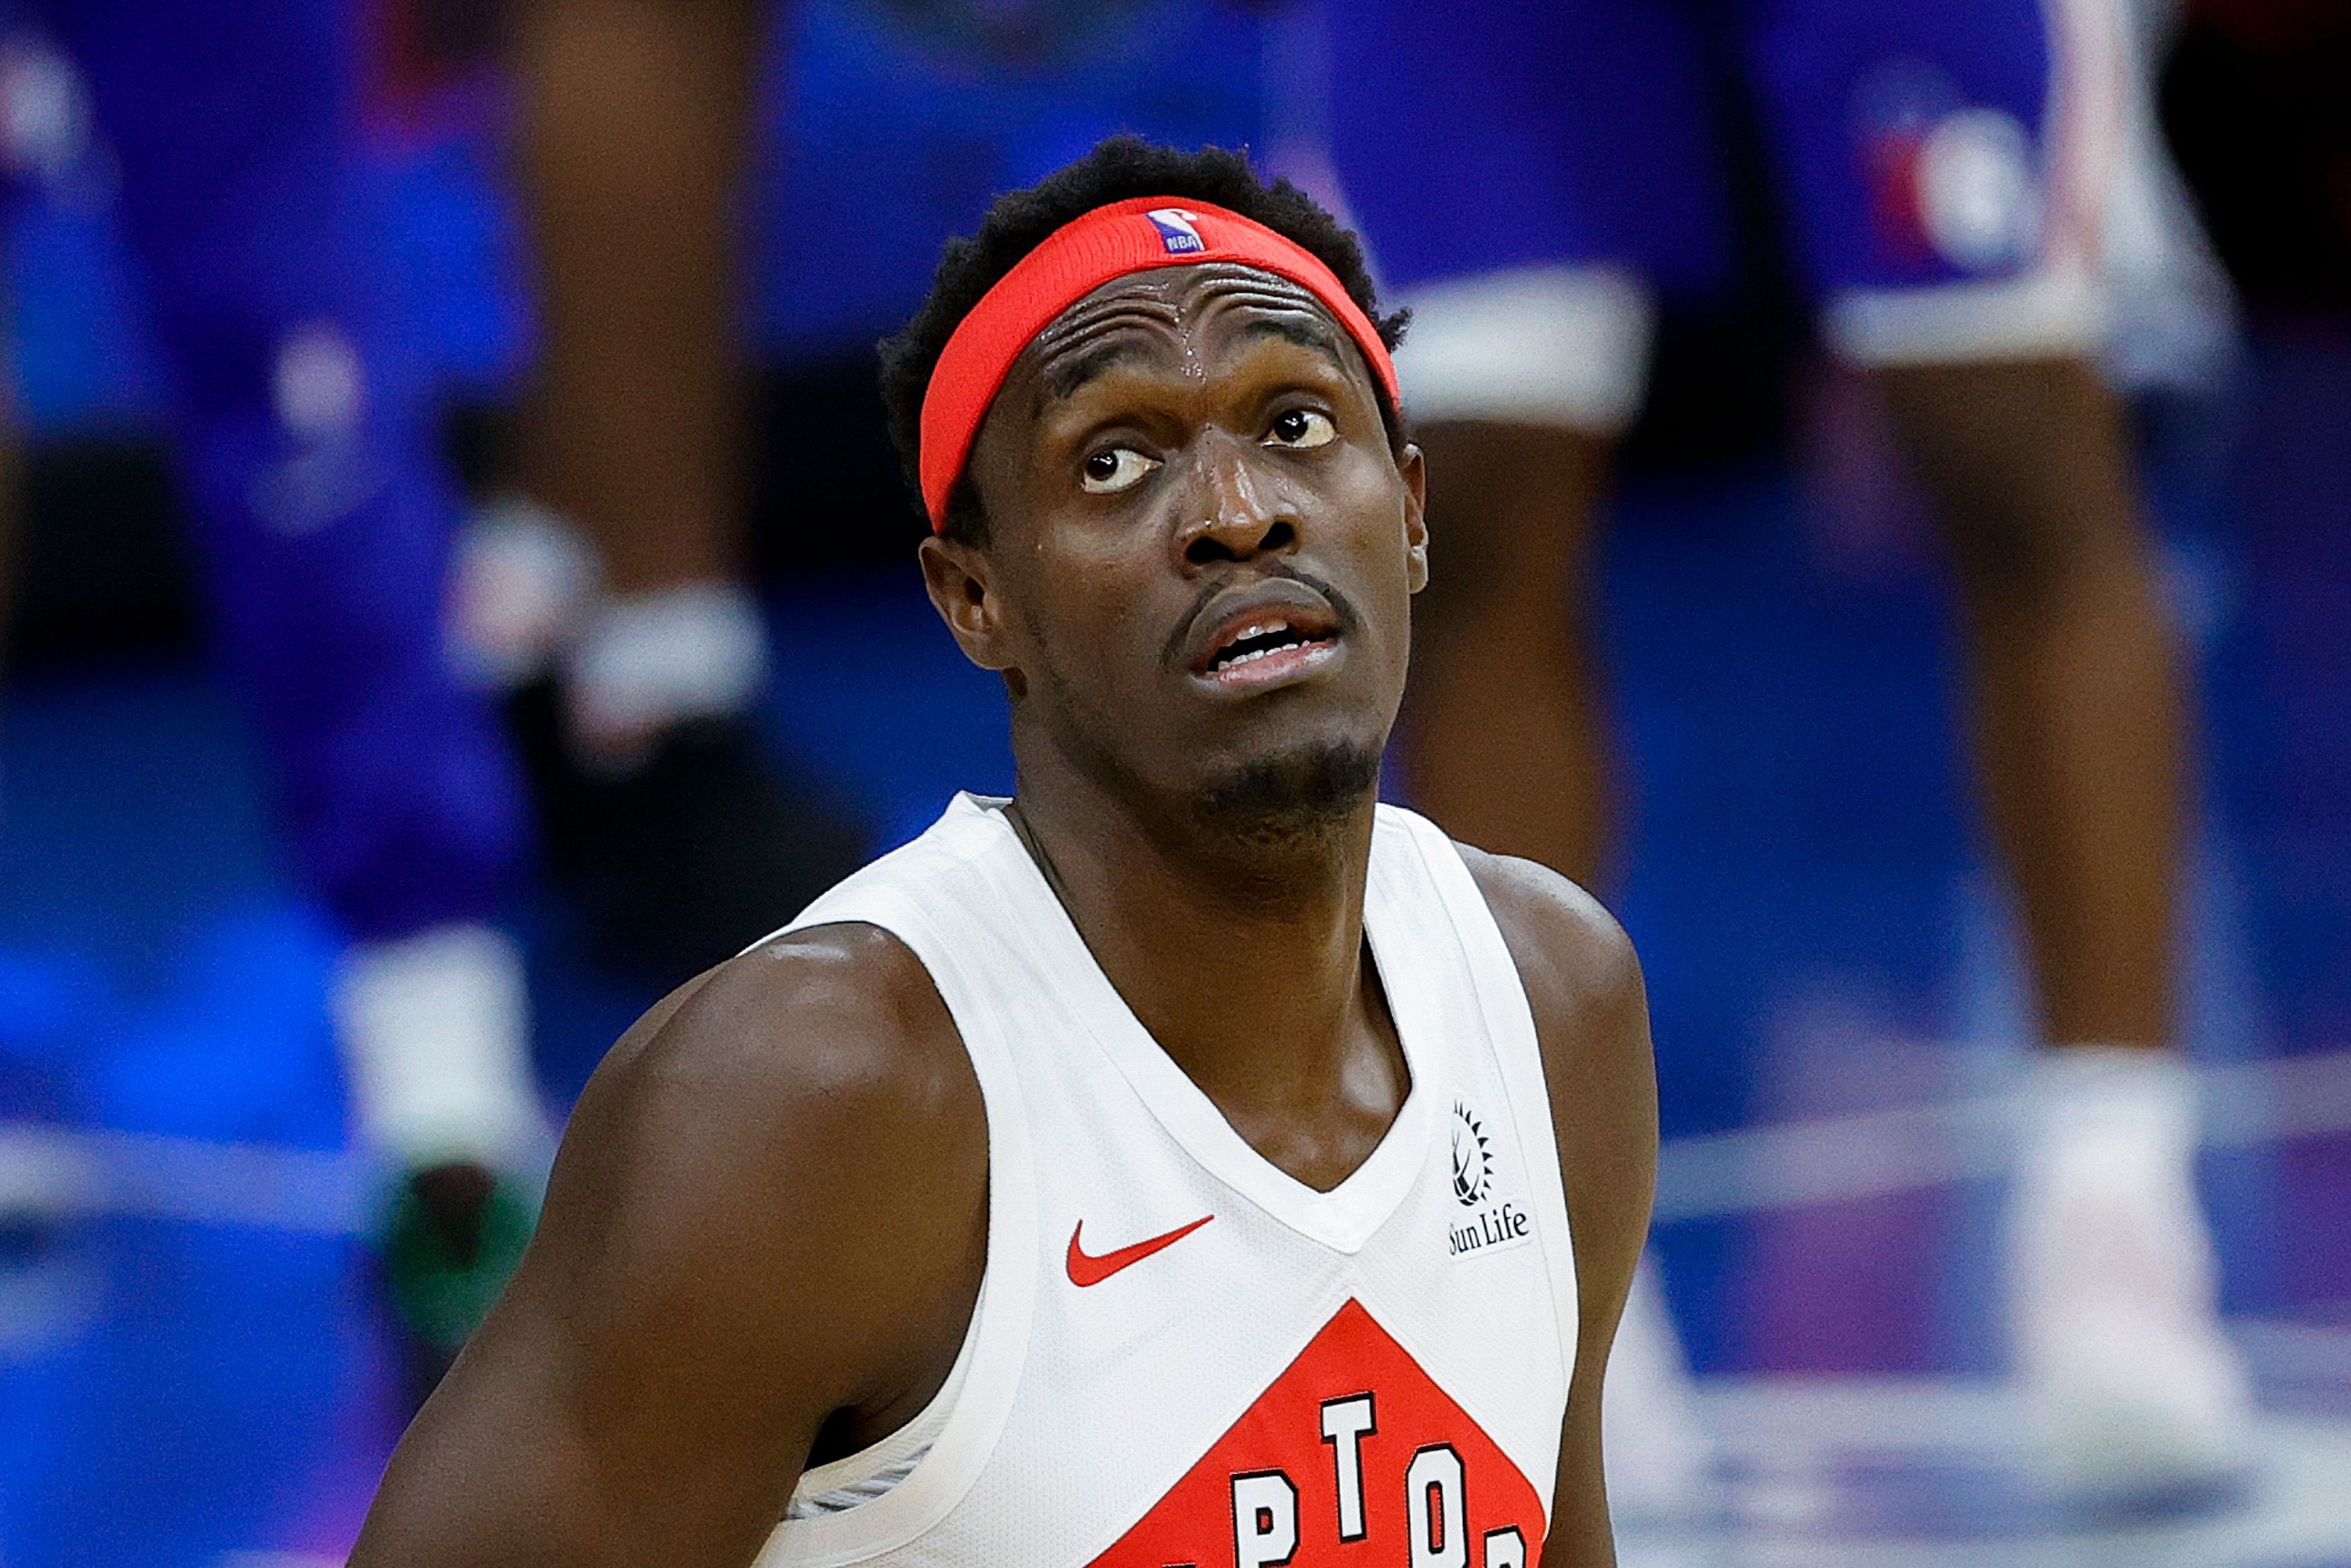 Pascal Siakam looking at the scoreboard